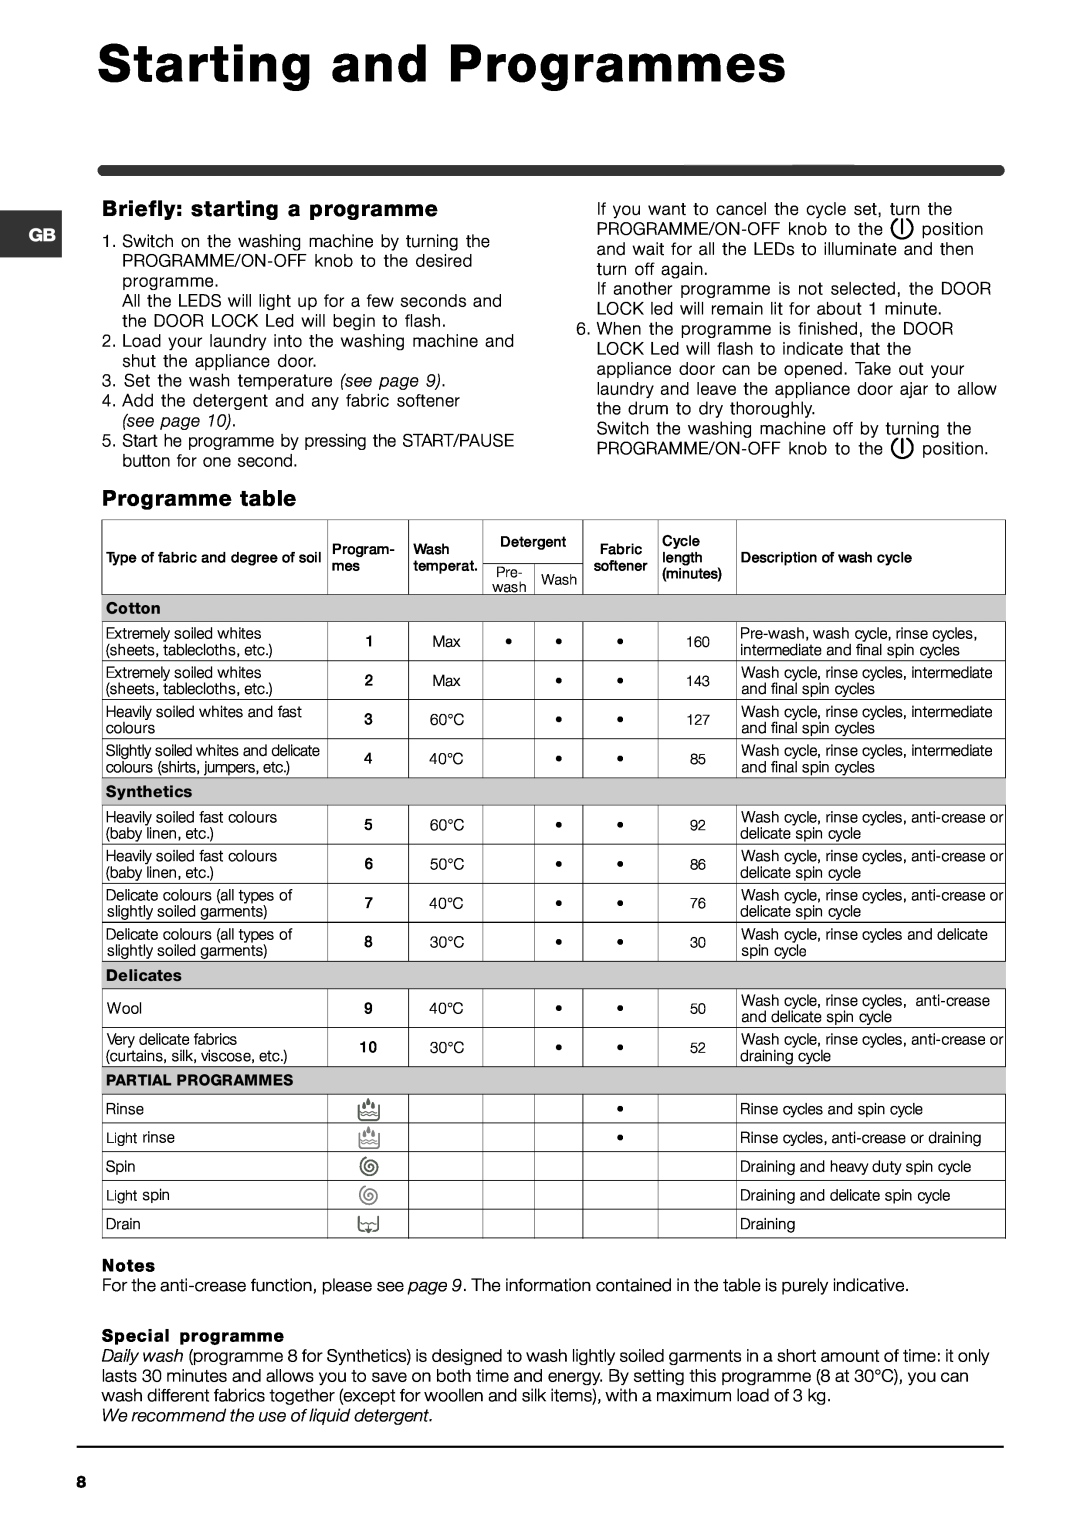 Indesit WIA 121 manual Starting and Programmes, Briefly starting a programme, Programme table 